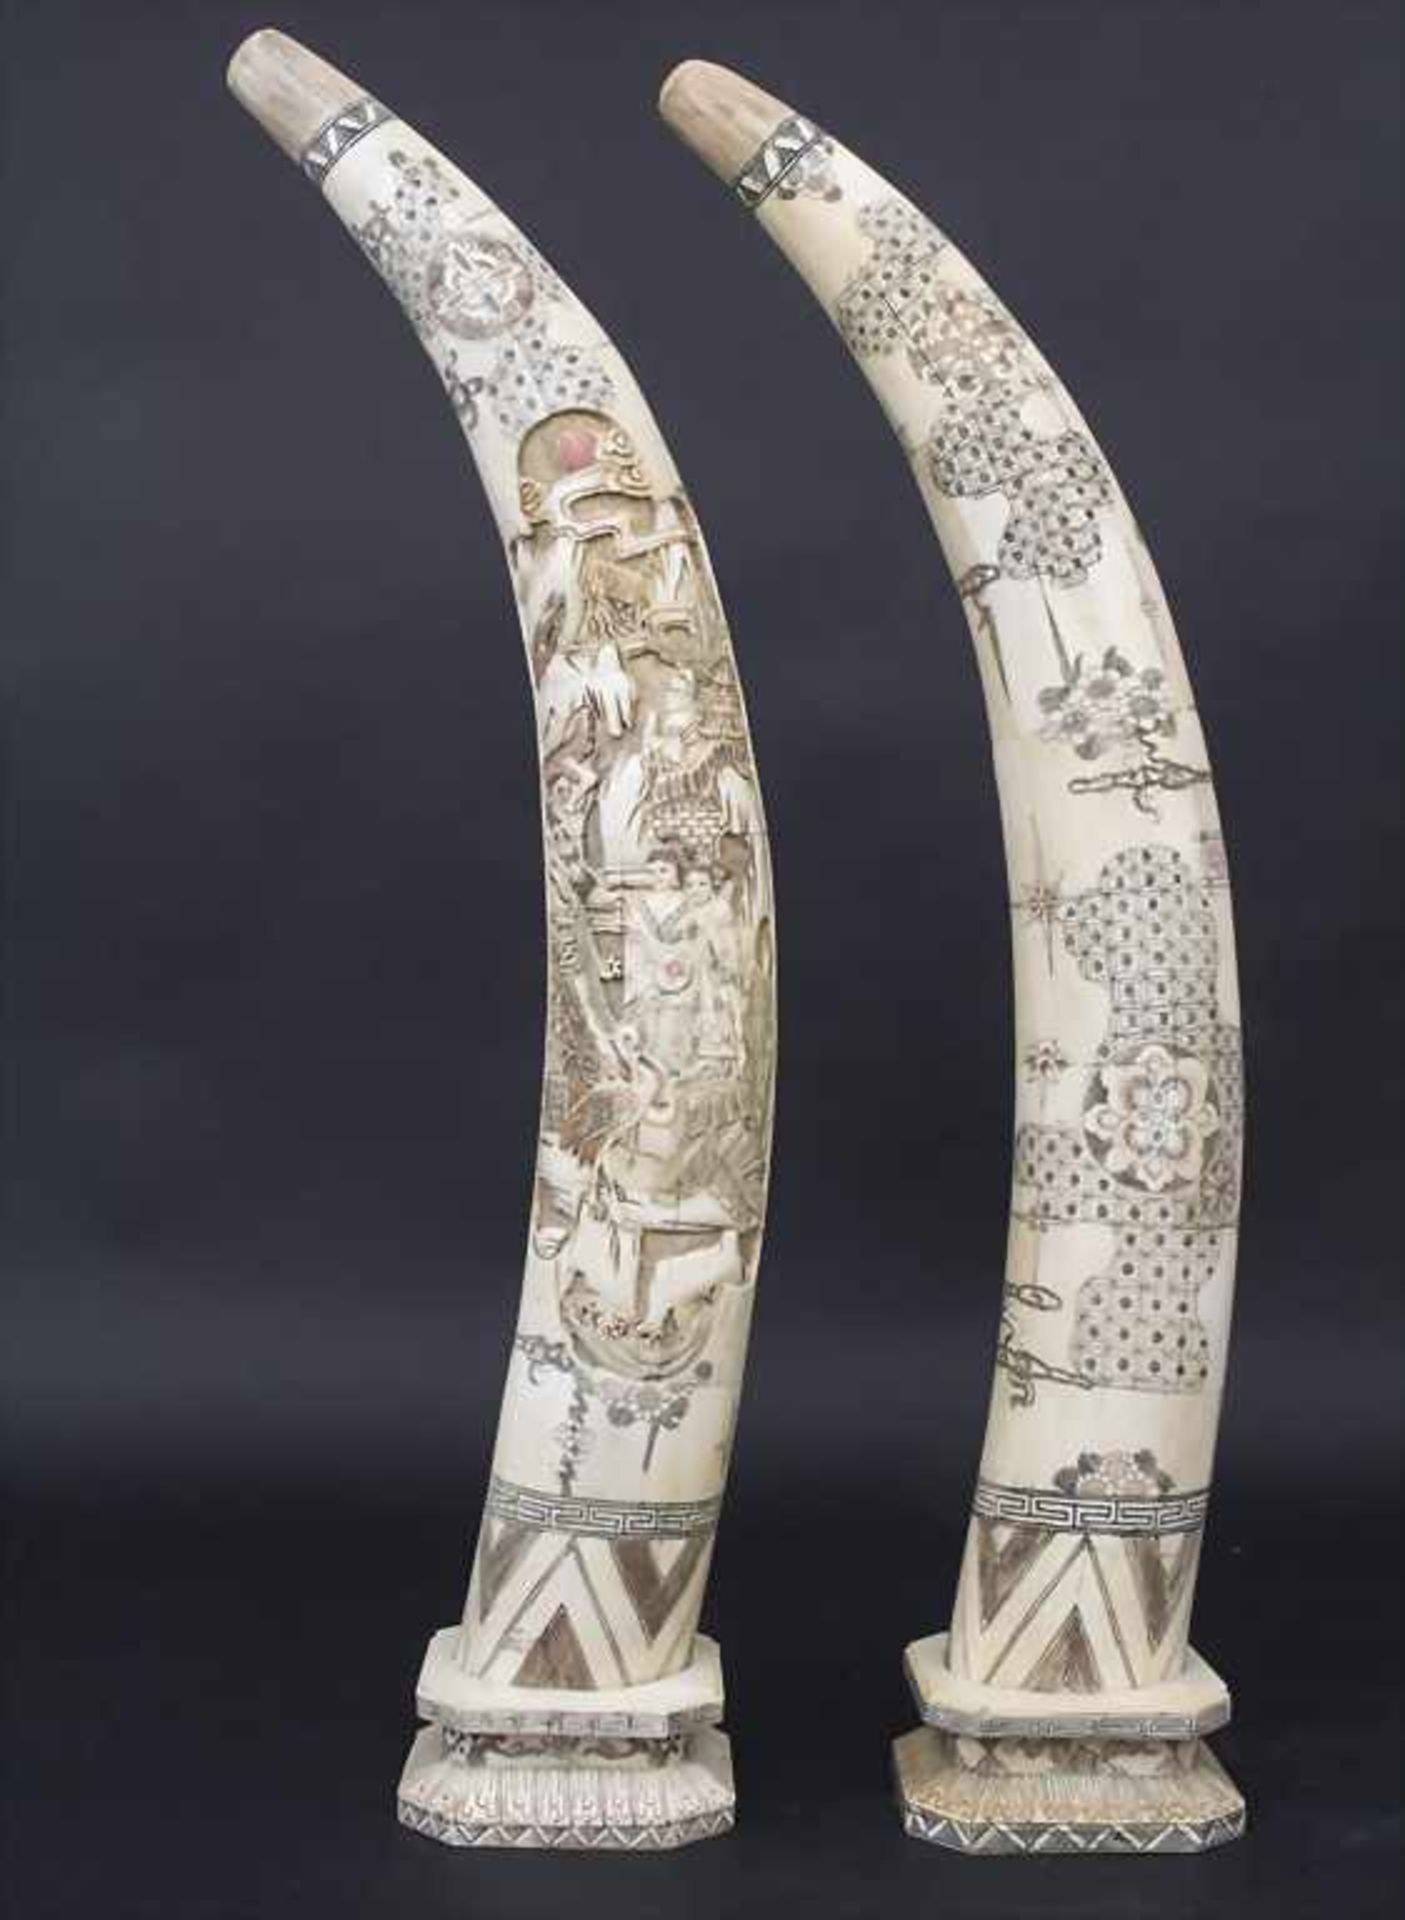 Paar Bein-Stoßzähne mit Schnitzdekor / A pair of bone tusks with carvings, China, 20. Jh.<b